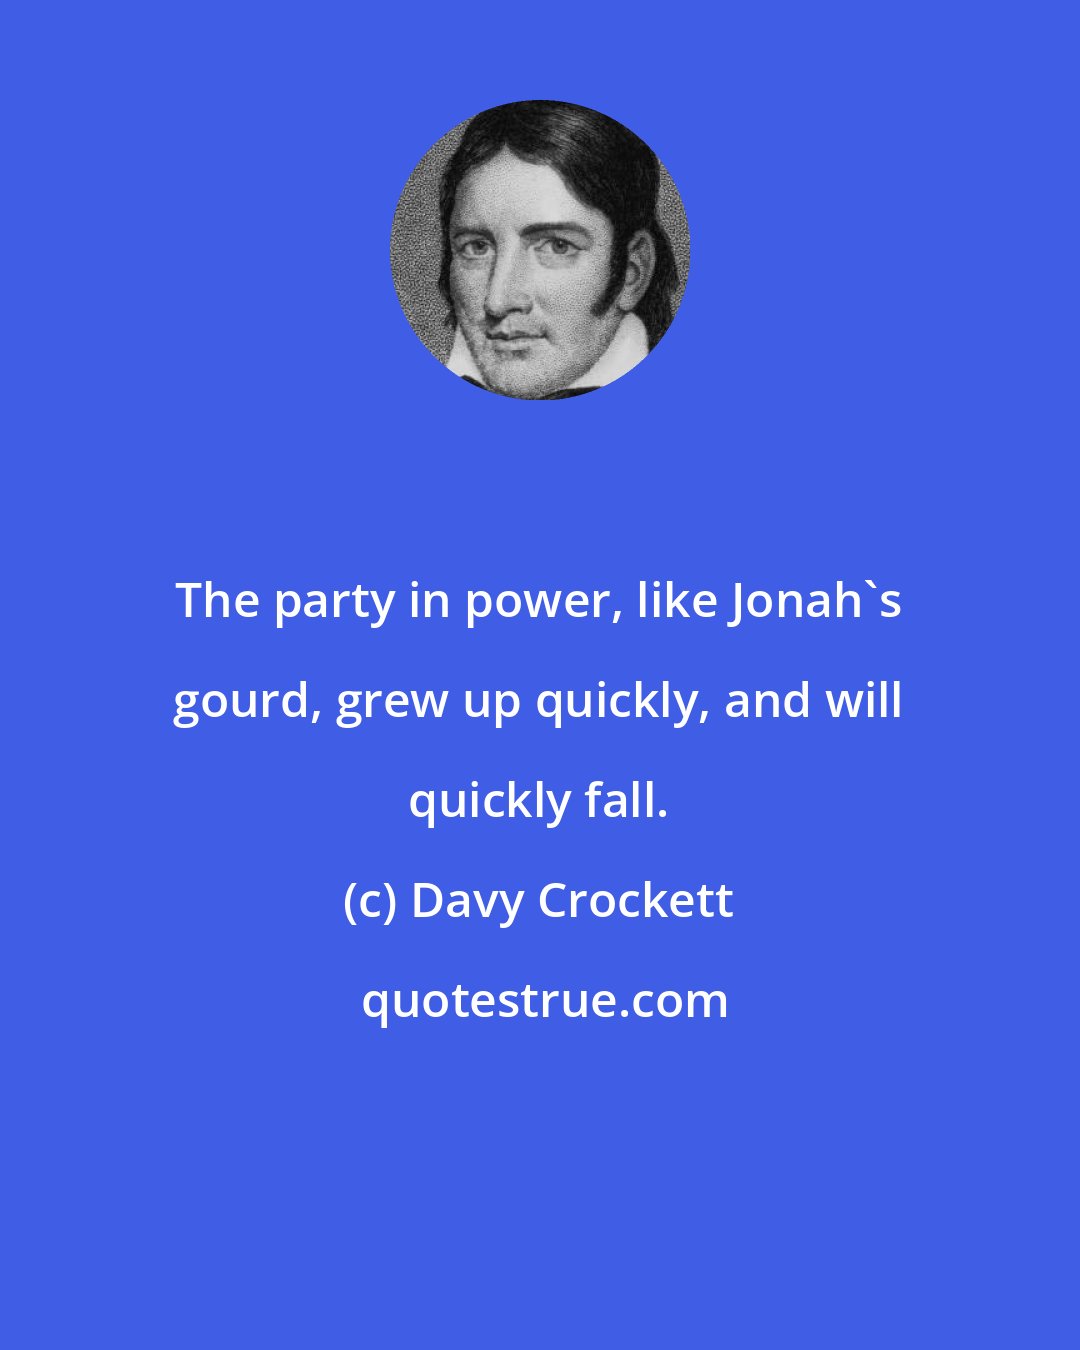 Davy Crockett: The party in power, like Jonah's gourd, grew up quickly, and will quickly fall.